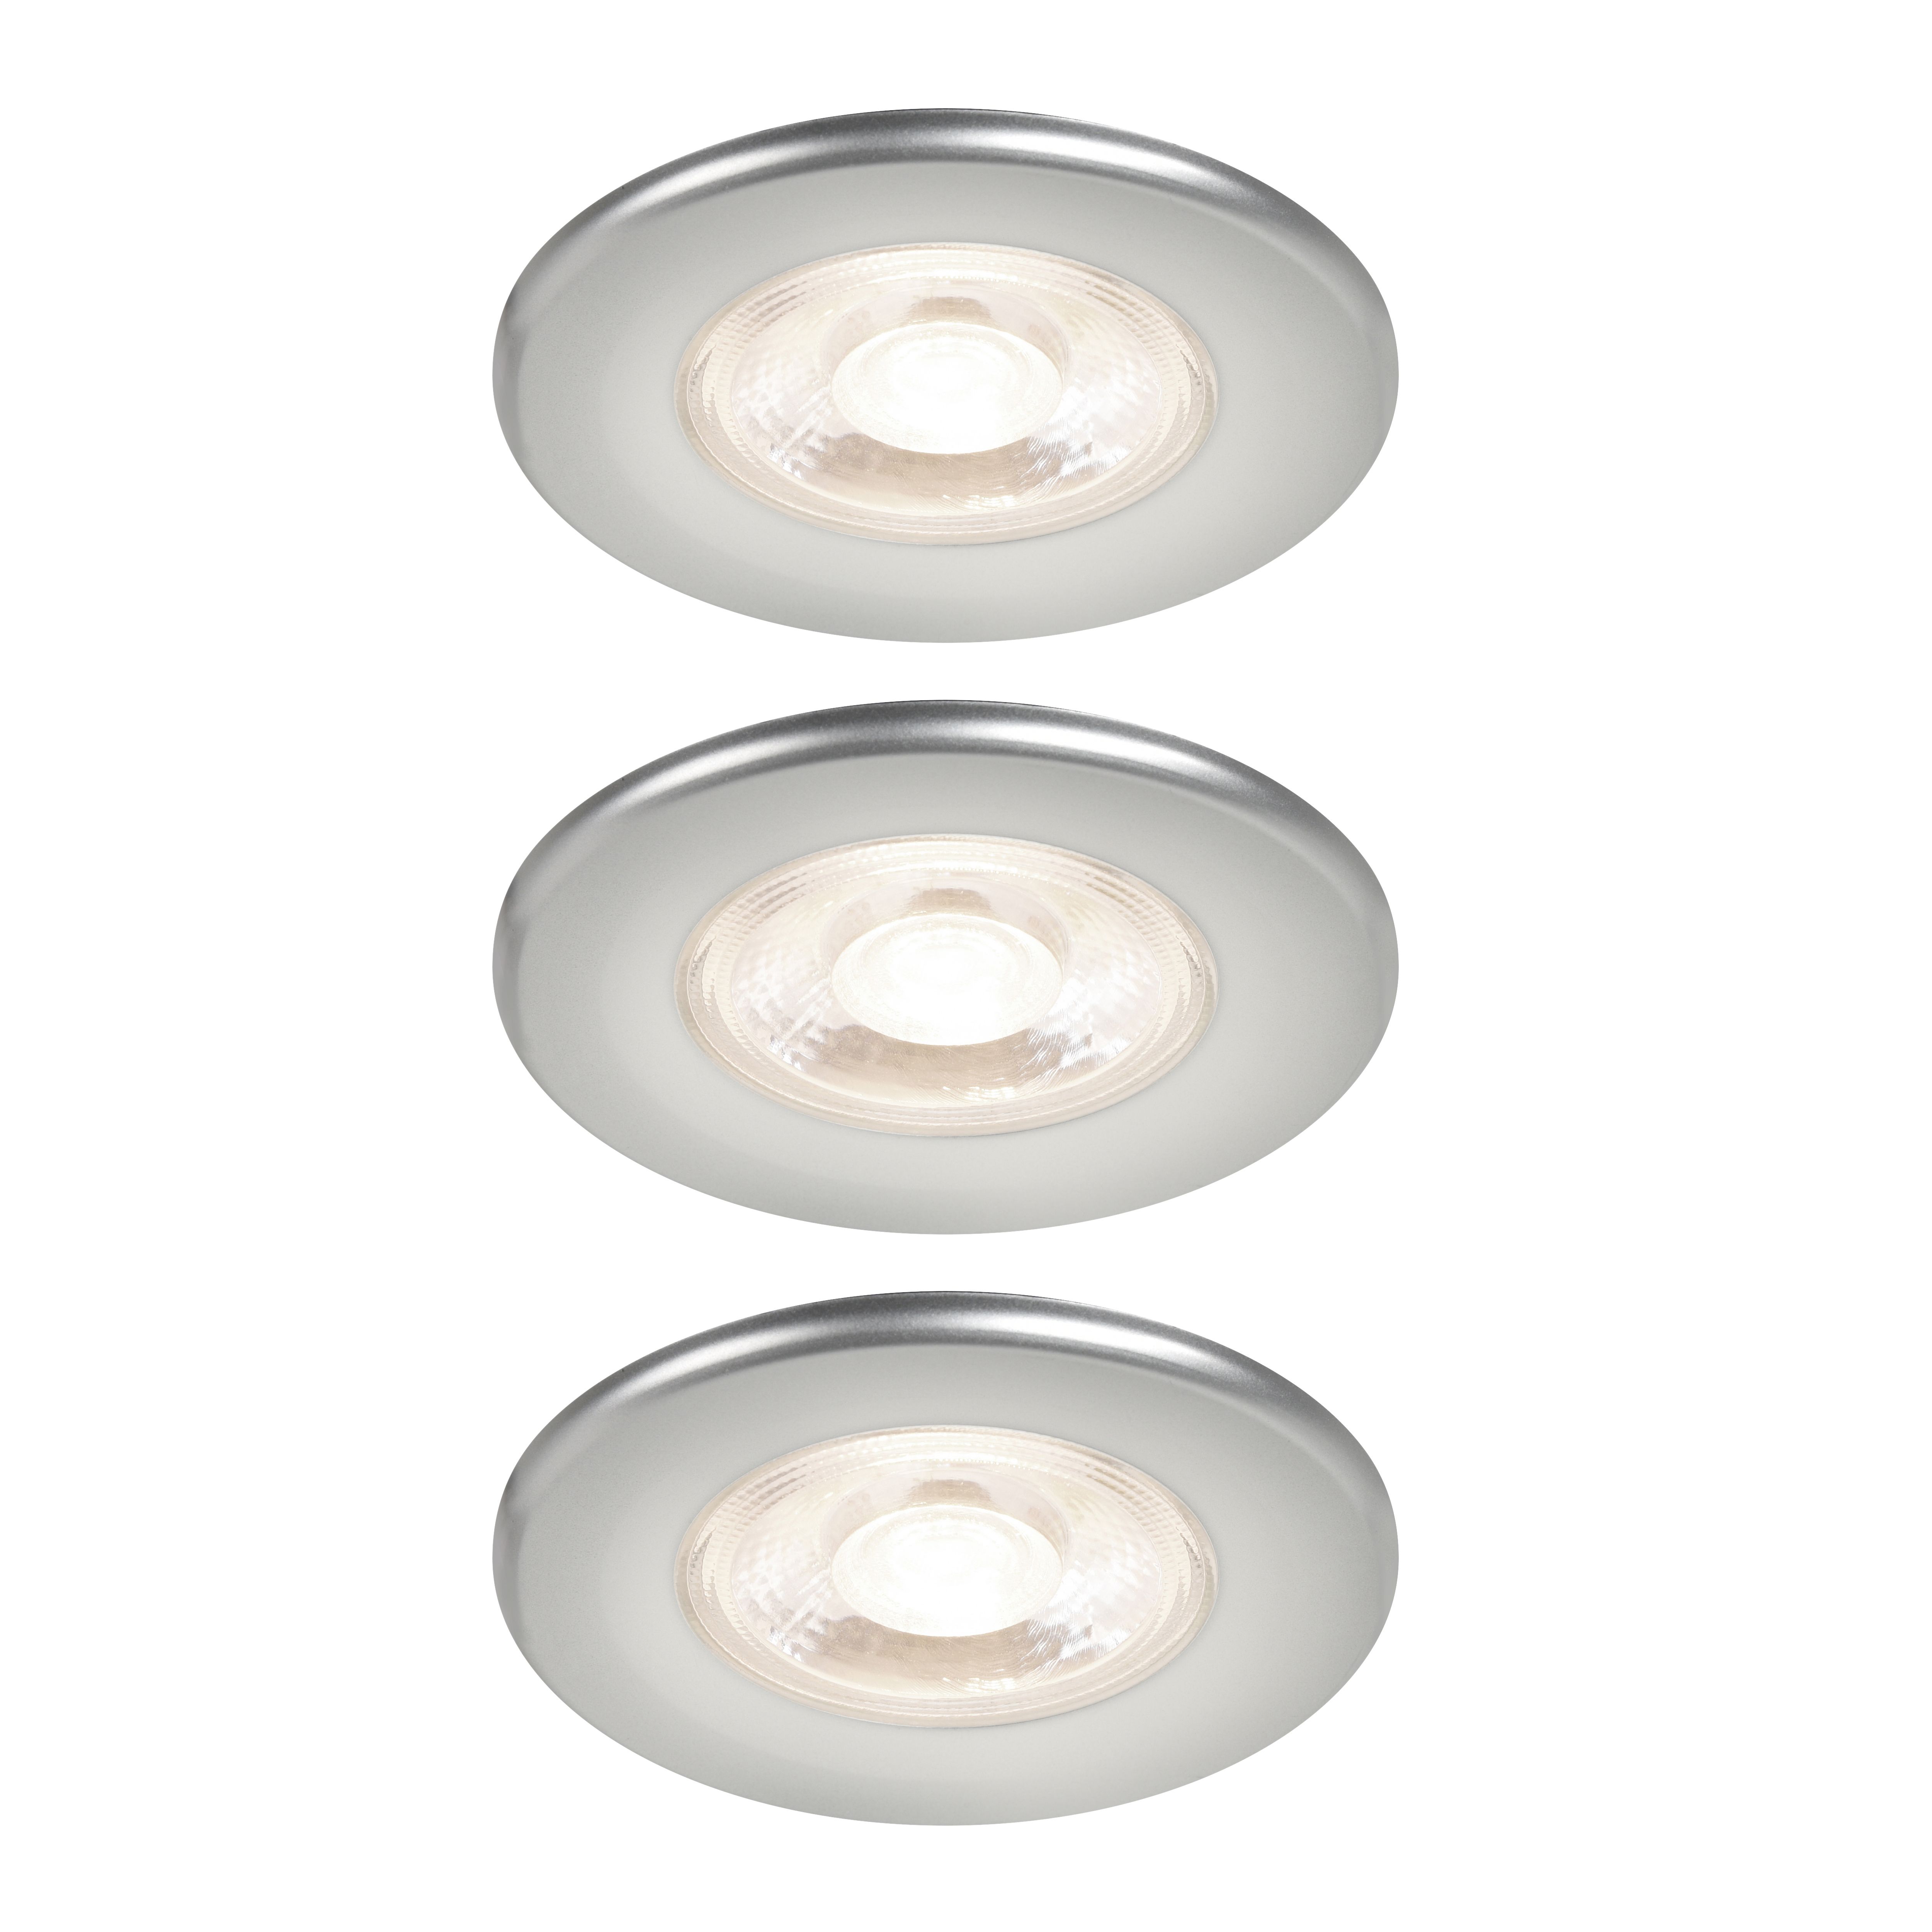 Gamow Matt Pewter effect Fixed LED Fire-rated Warm & neutral Downlight 5W IP65, Pack of 3